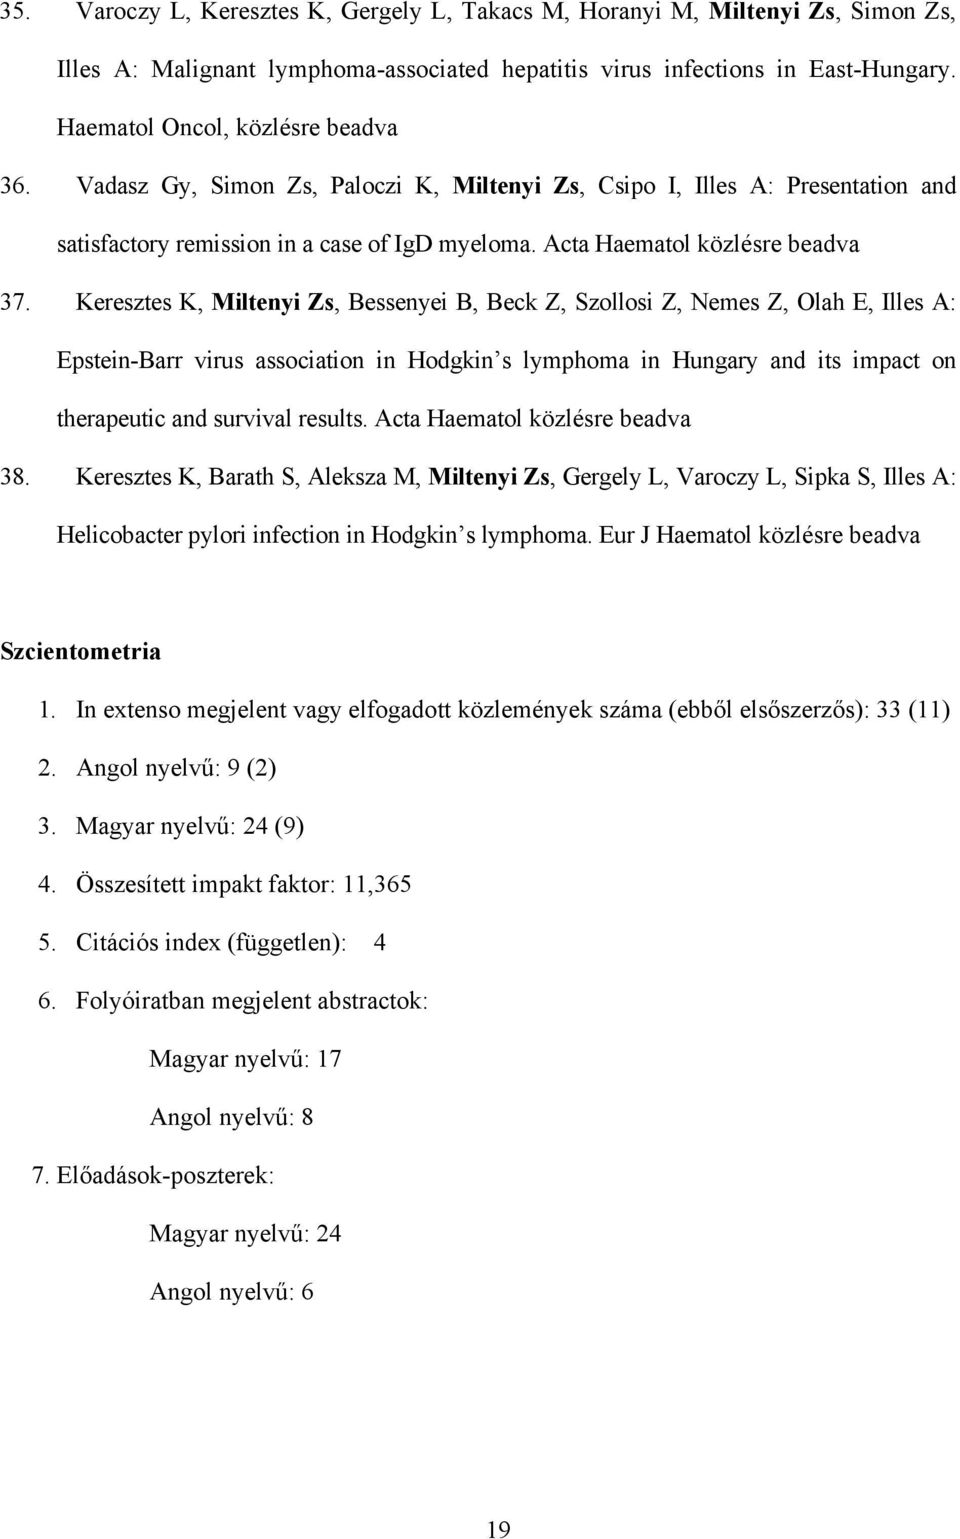 Keresztes K, Miltenyi Zs, Bessenyei B, Beck Z, Szollosi Z, Nemes Z, Olah E, Illes A: Epstein-Barr virus association in Hodgkin s lymphoma in Hungary and its impact on therapeutic and survival results.